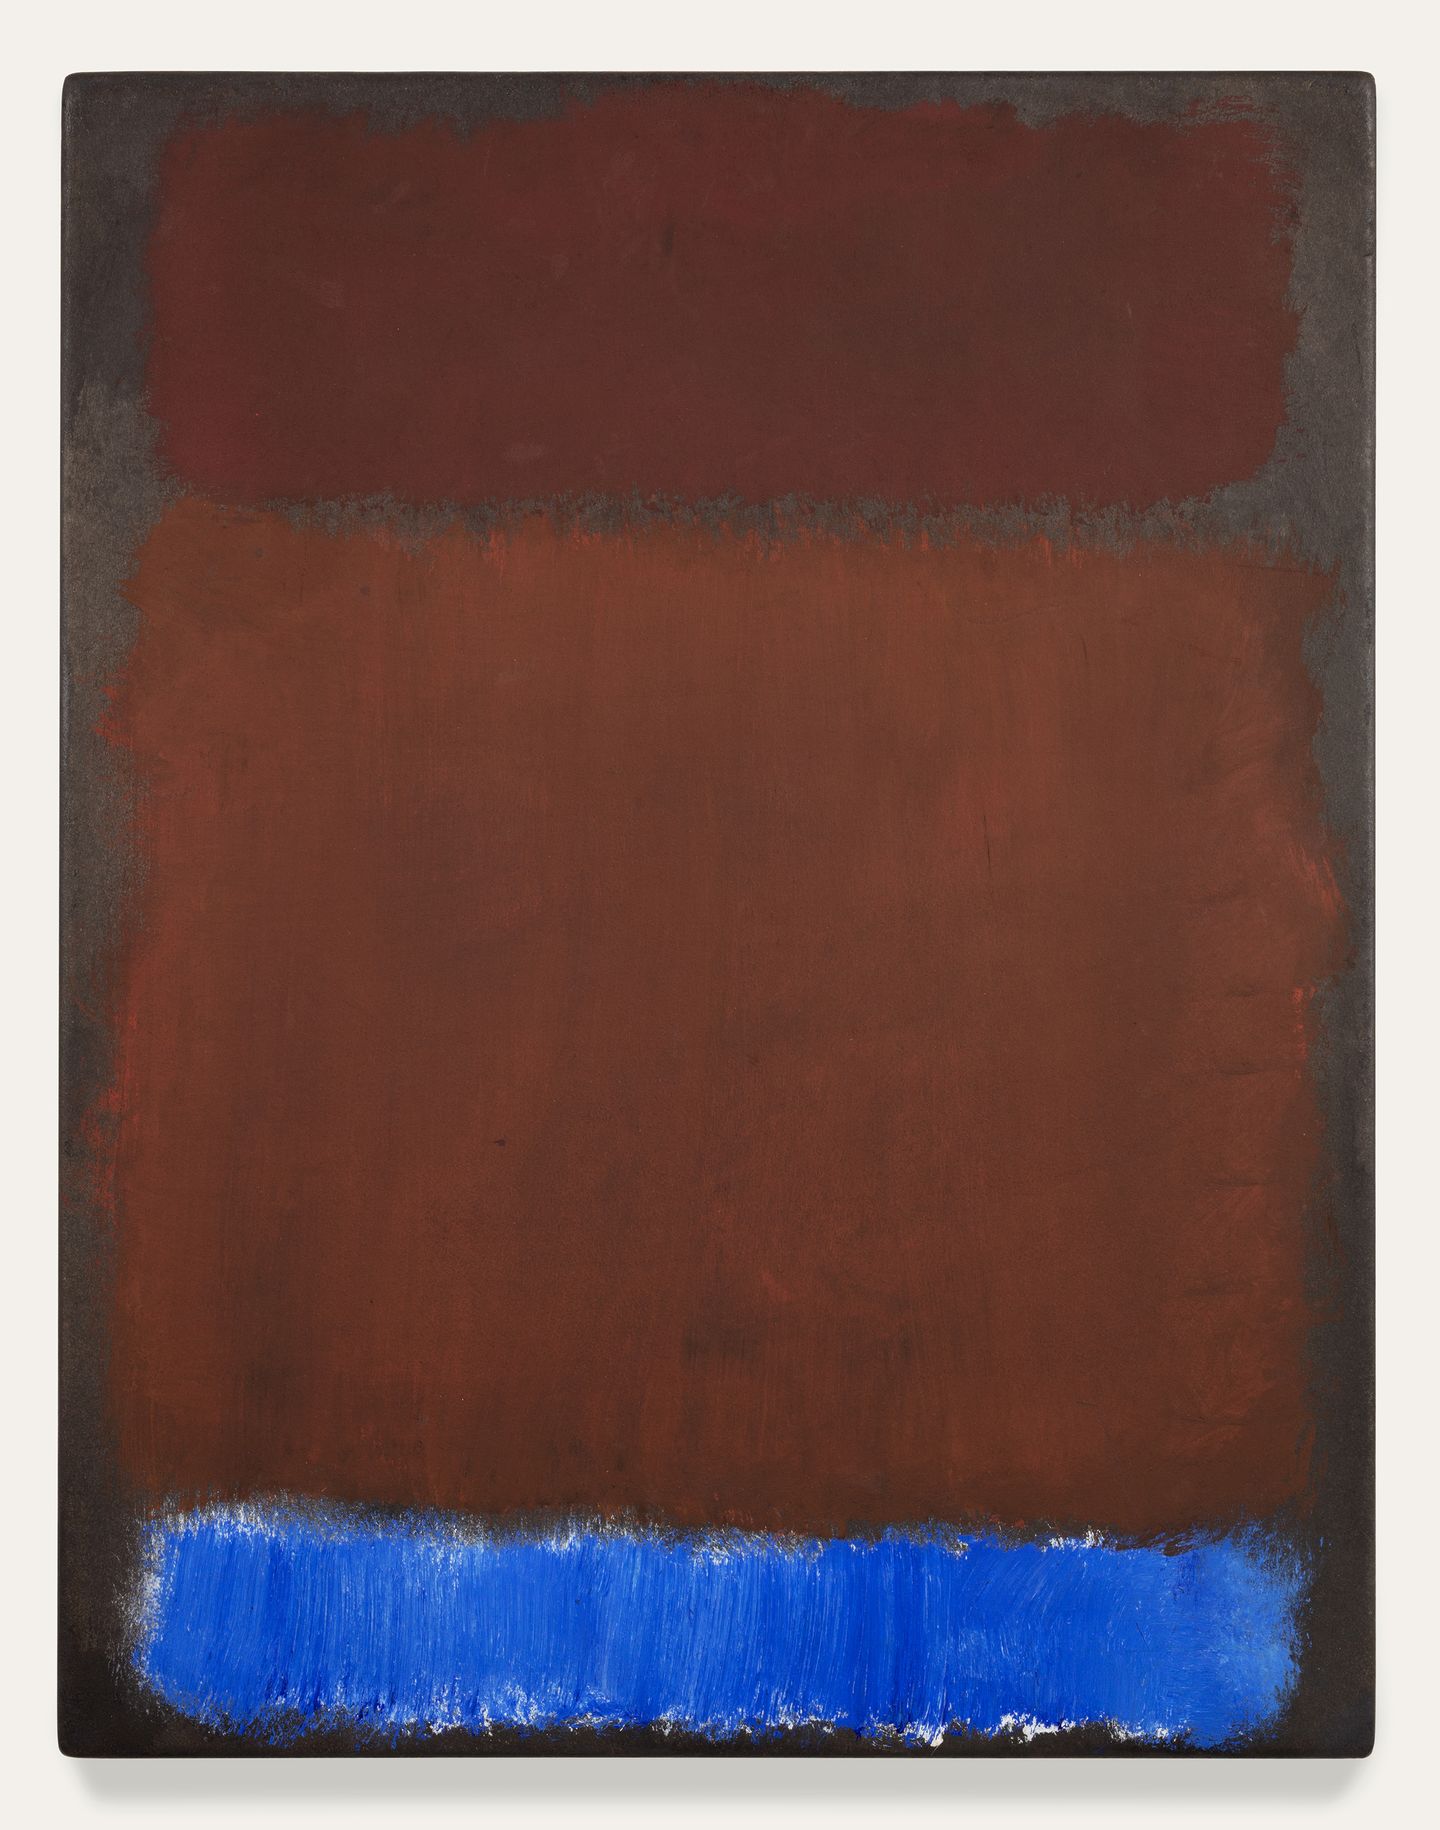 Mark Rothko, Untitled (1968). Acrylic on paper mounted on board. 60.3 cm × 47.3 cm.  Private collection, New York. Courtesy Alex Brotmann Art Advisory. © Kate Rothko Prizel and Christopher Rothko.